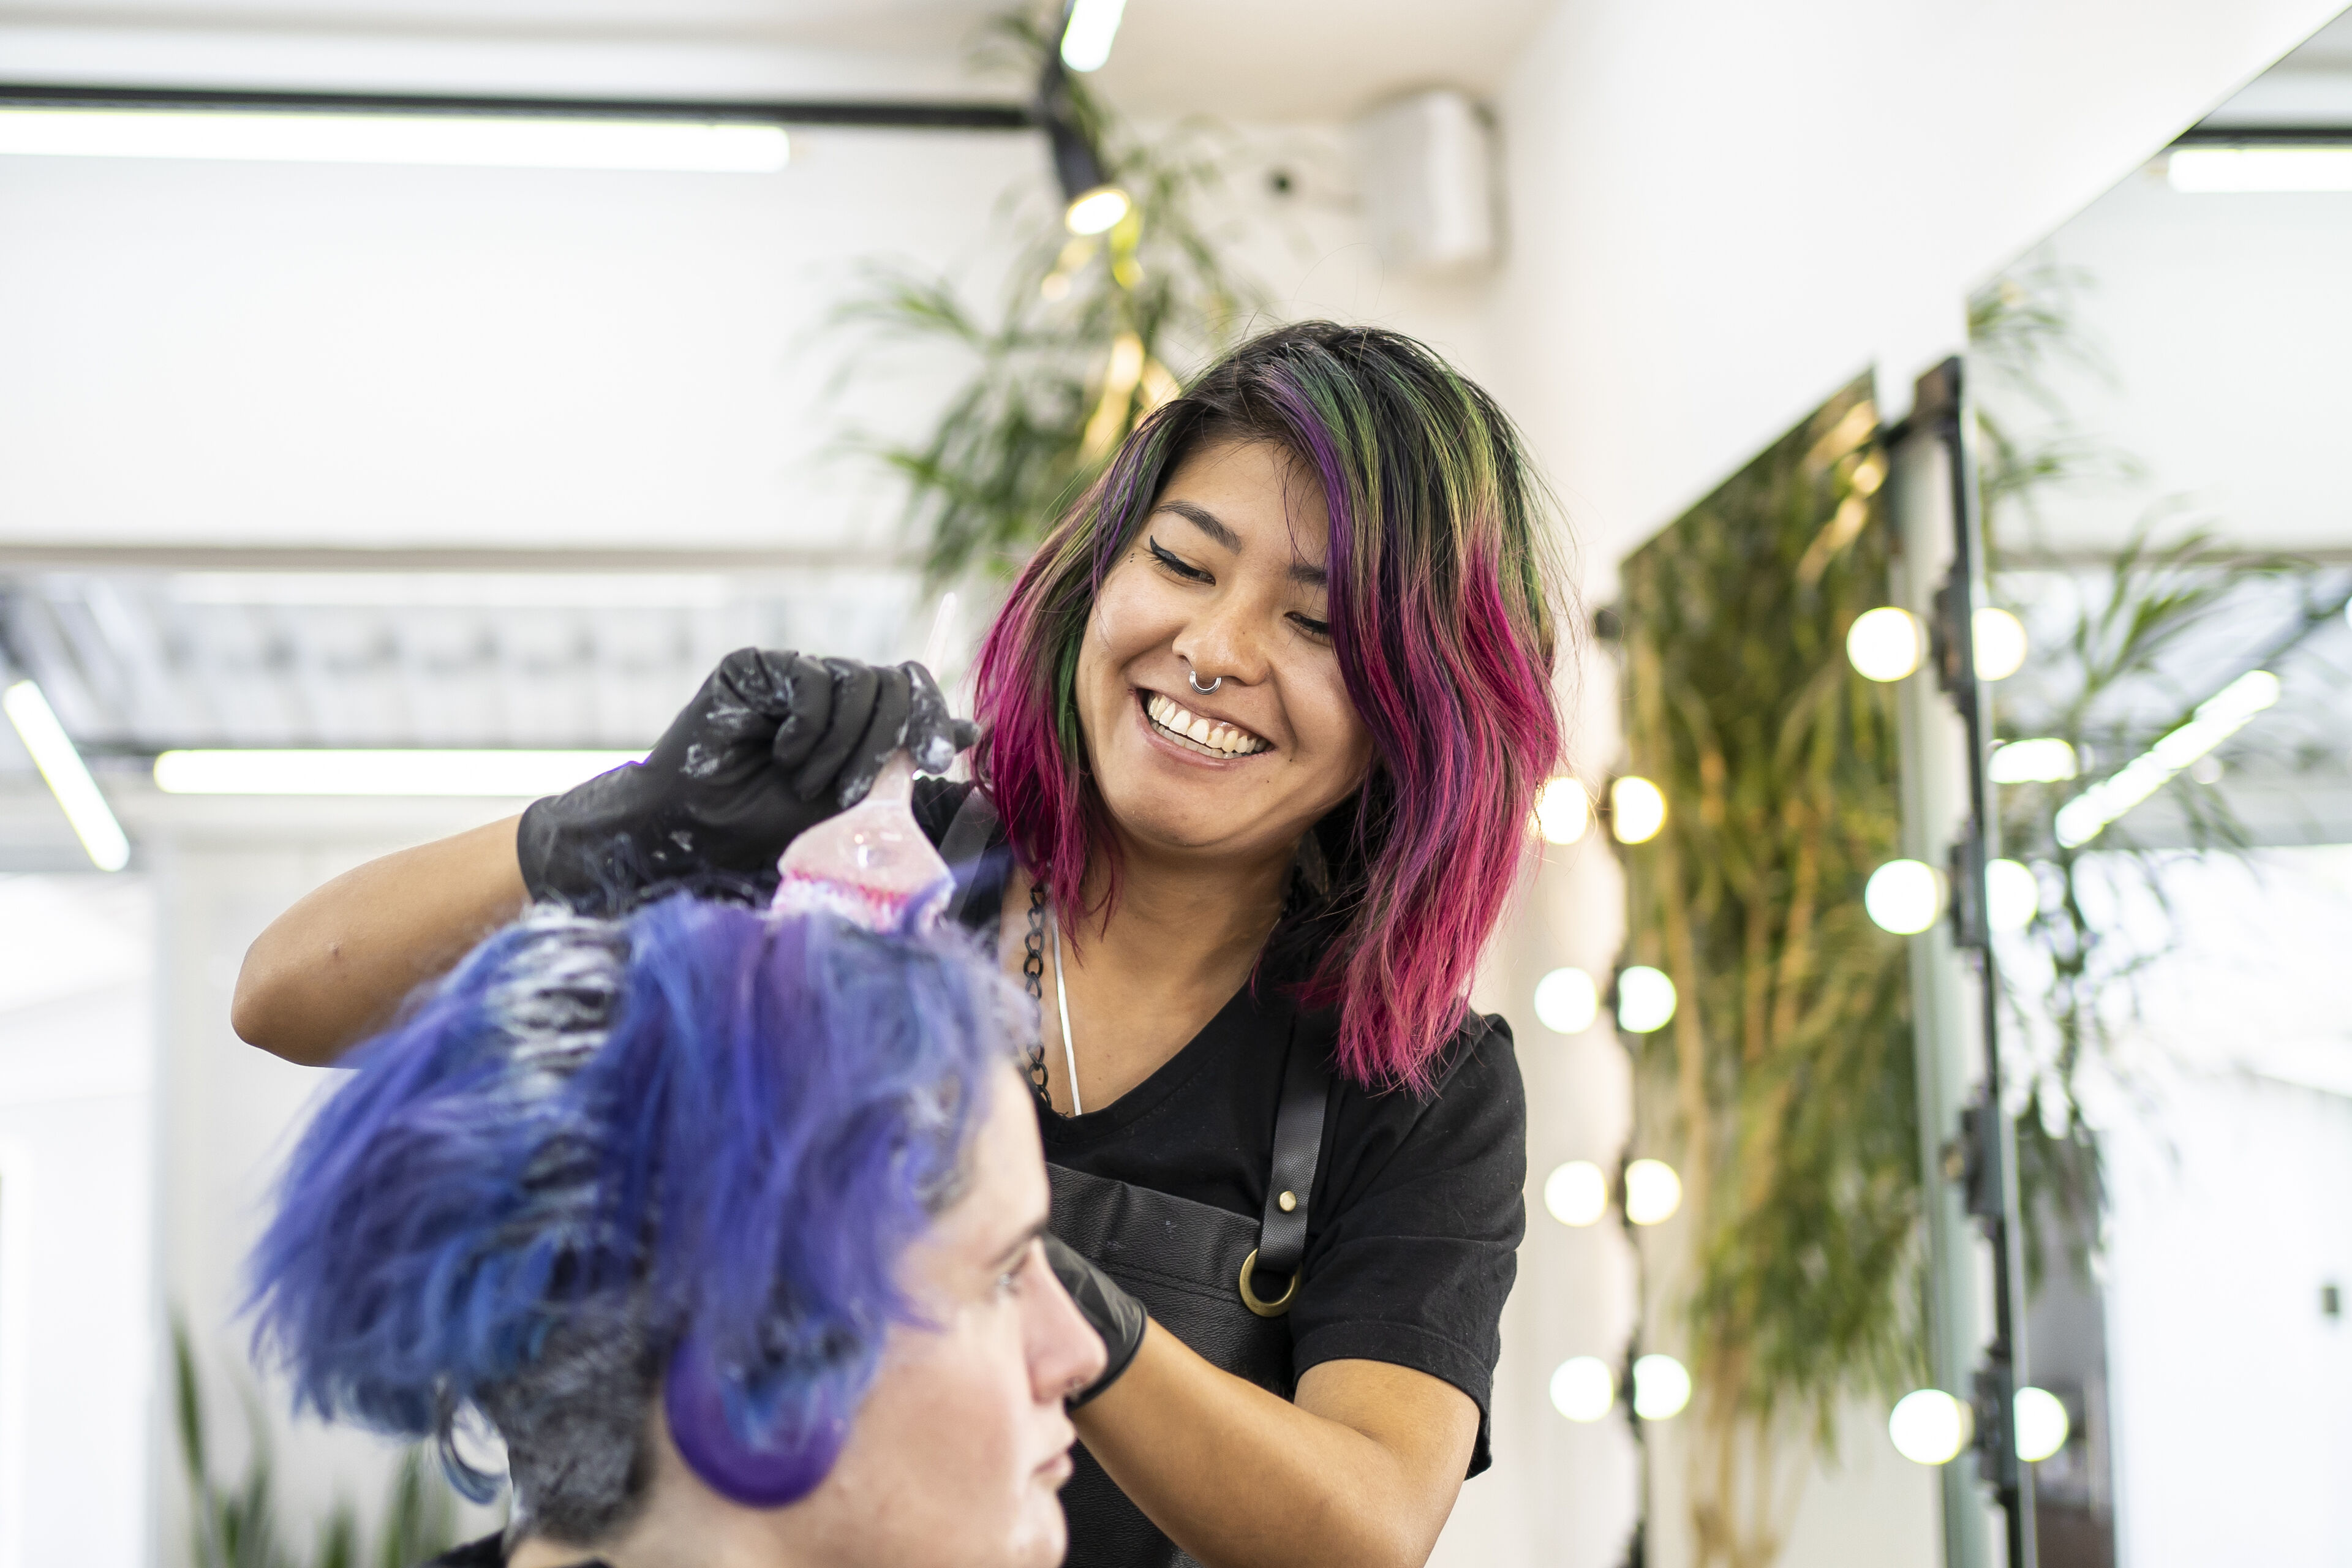 ImageA smiling hair colorist with vibrant pink hair applies dye to a client's blue hair in a bright salon.